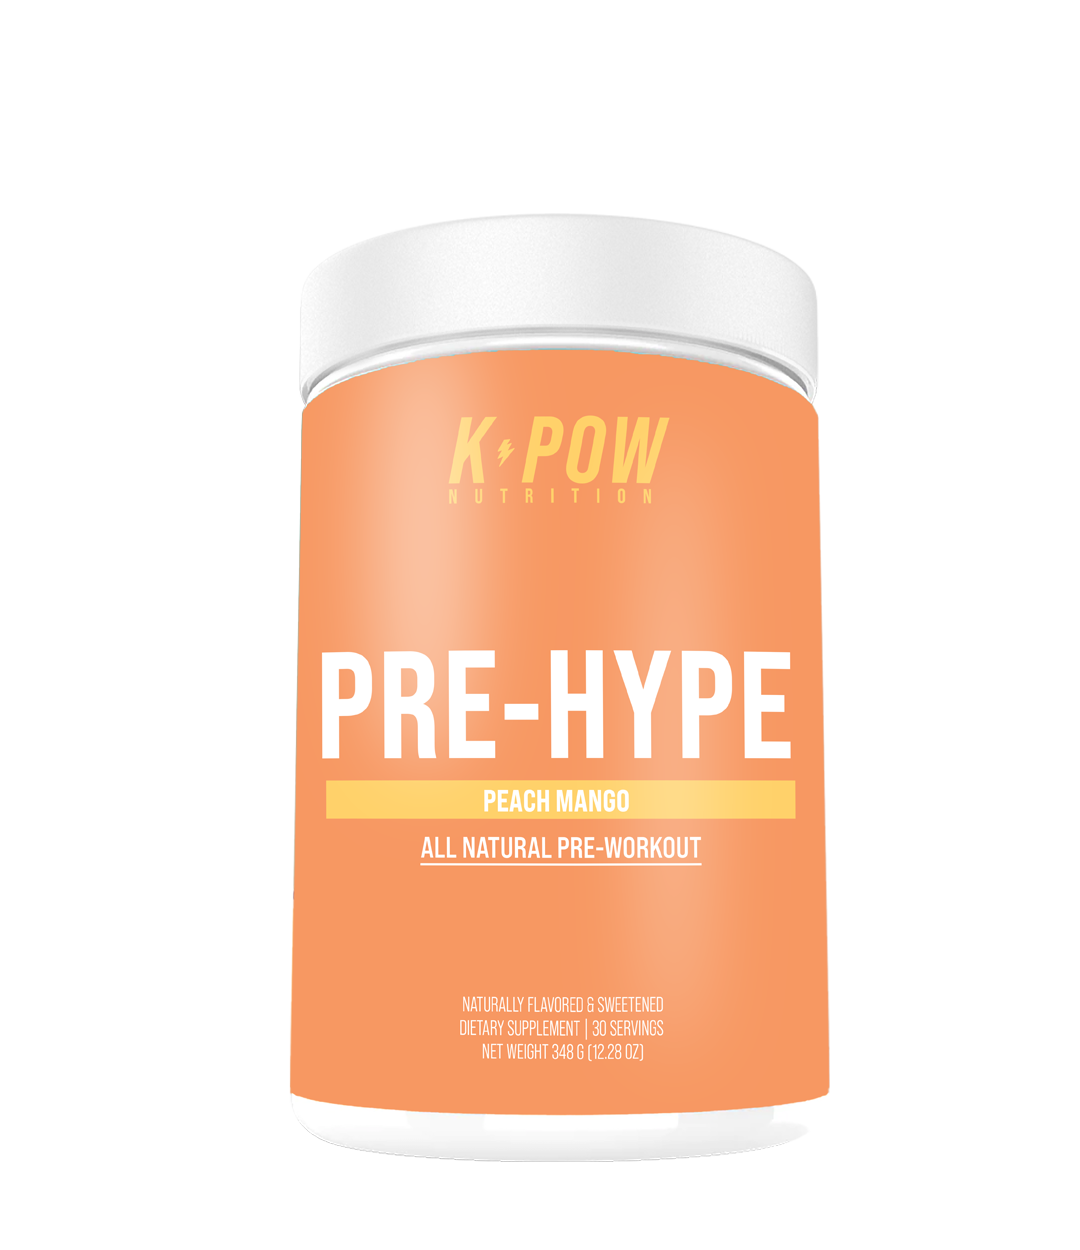 Pre-HYPE V2 // All Natural Pre-Workout